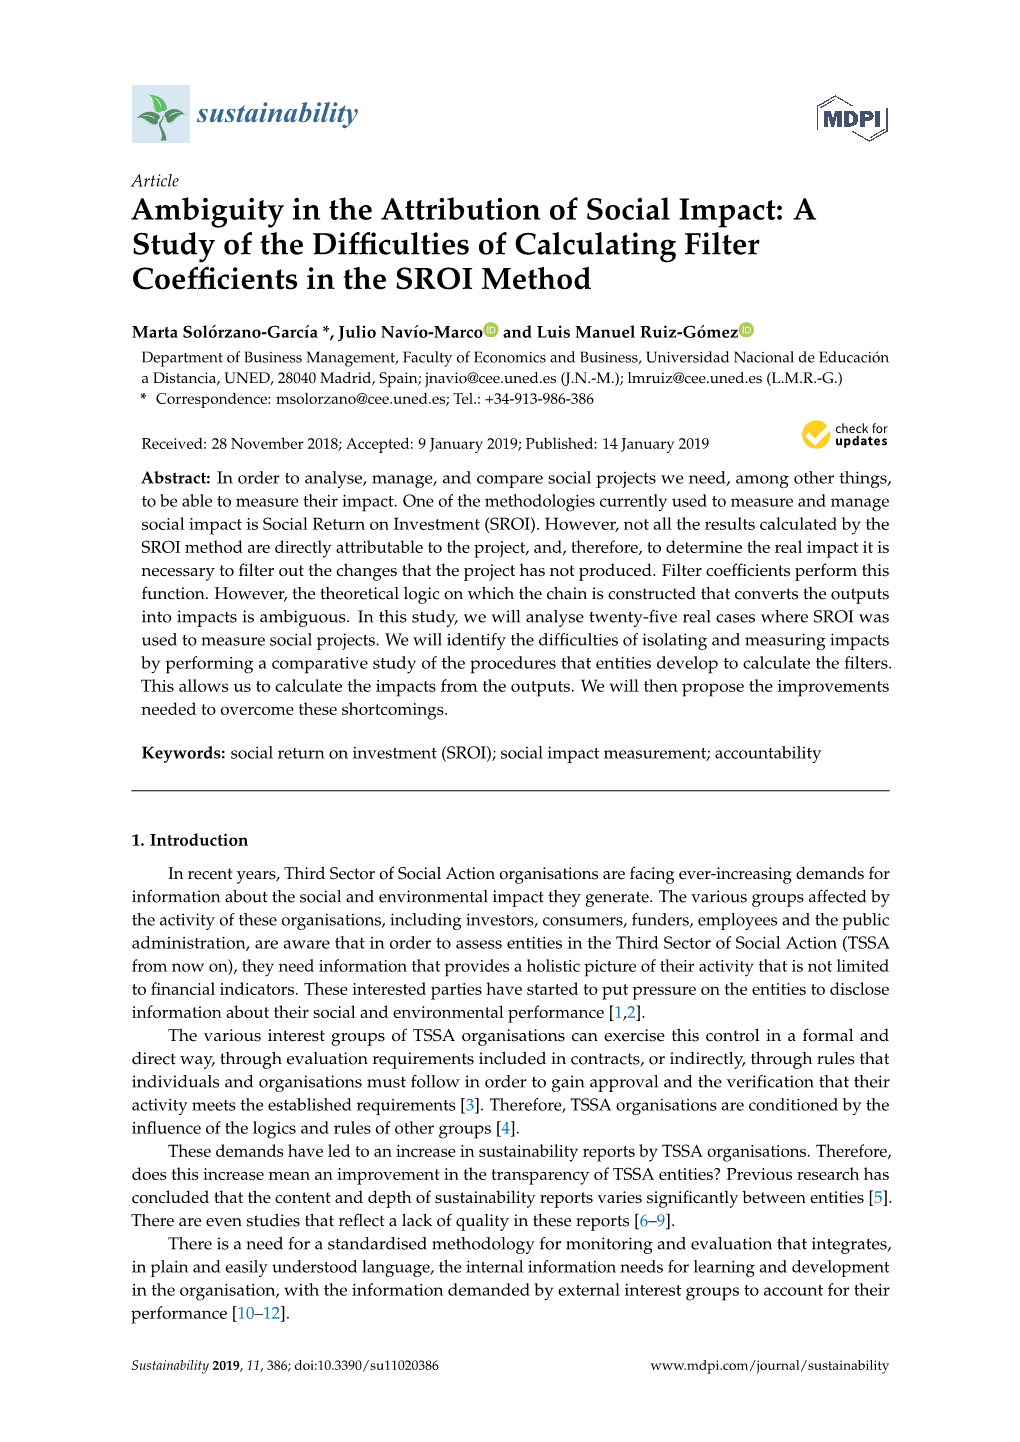 Ambiguity in the Attribution of Social Impact: a Study of the Difﬁculties of Calculating Filter Coefﬁcients in the SROI Method